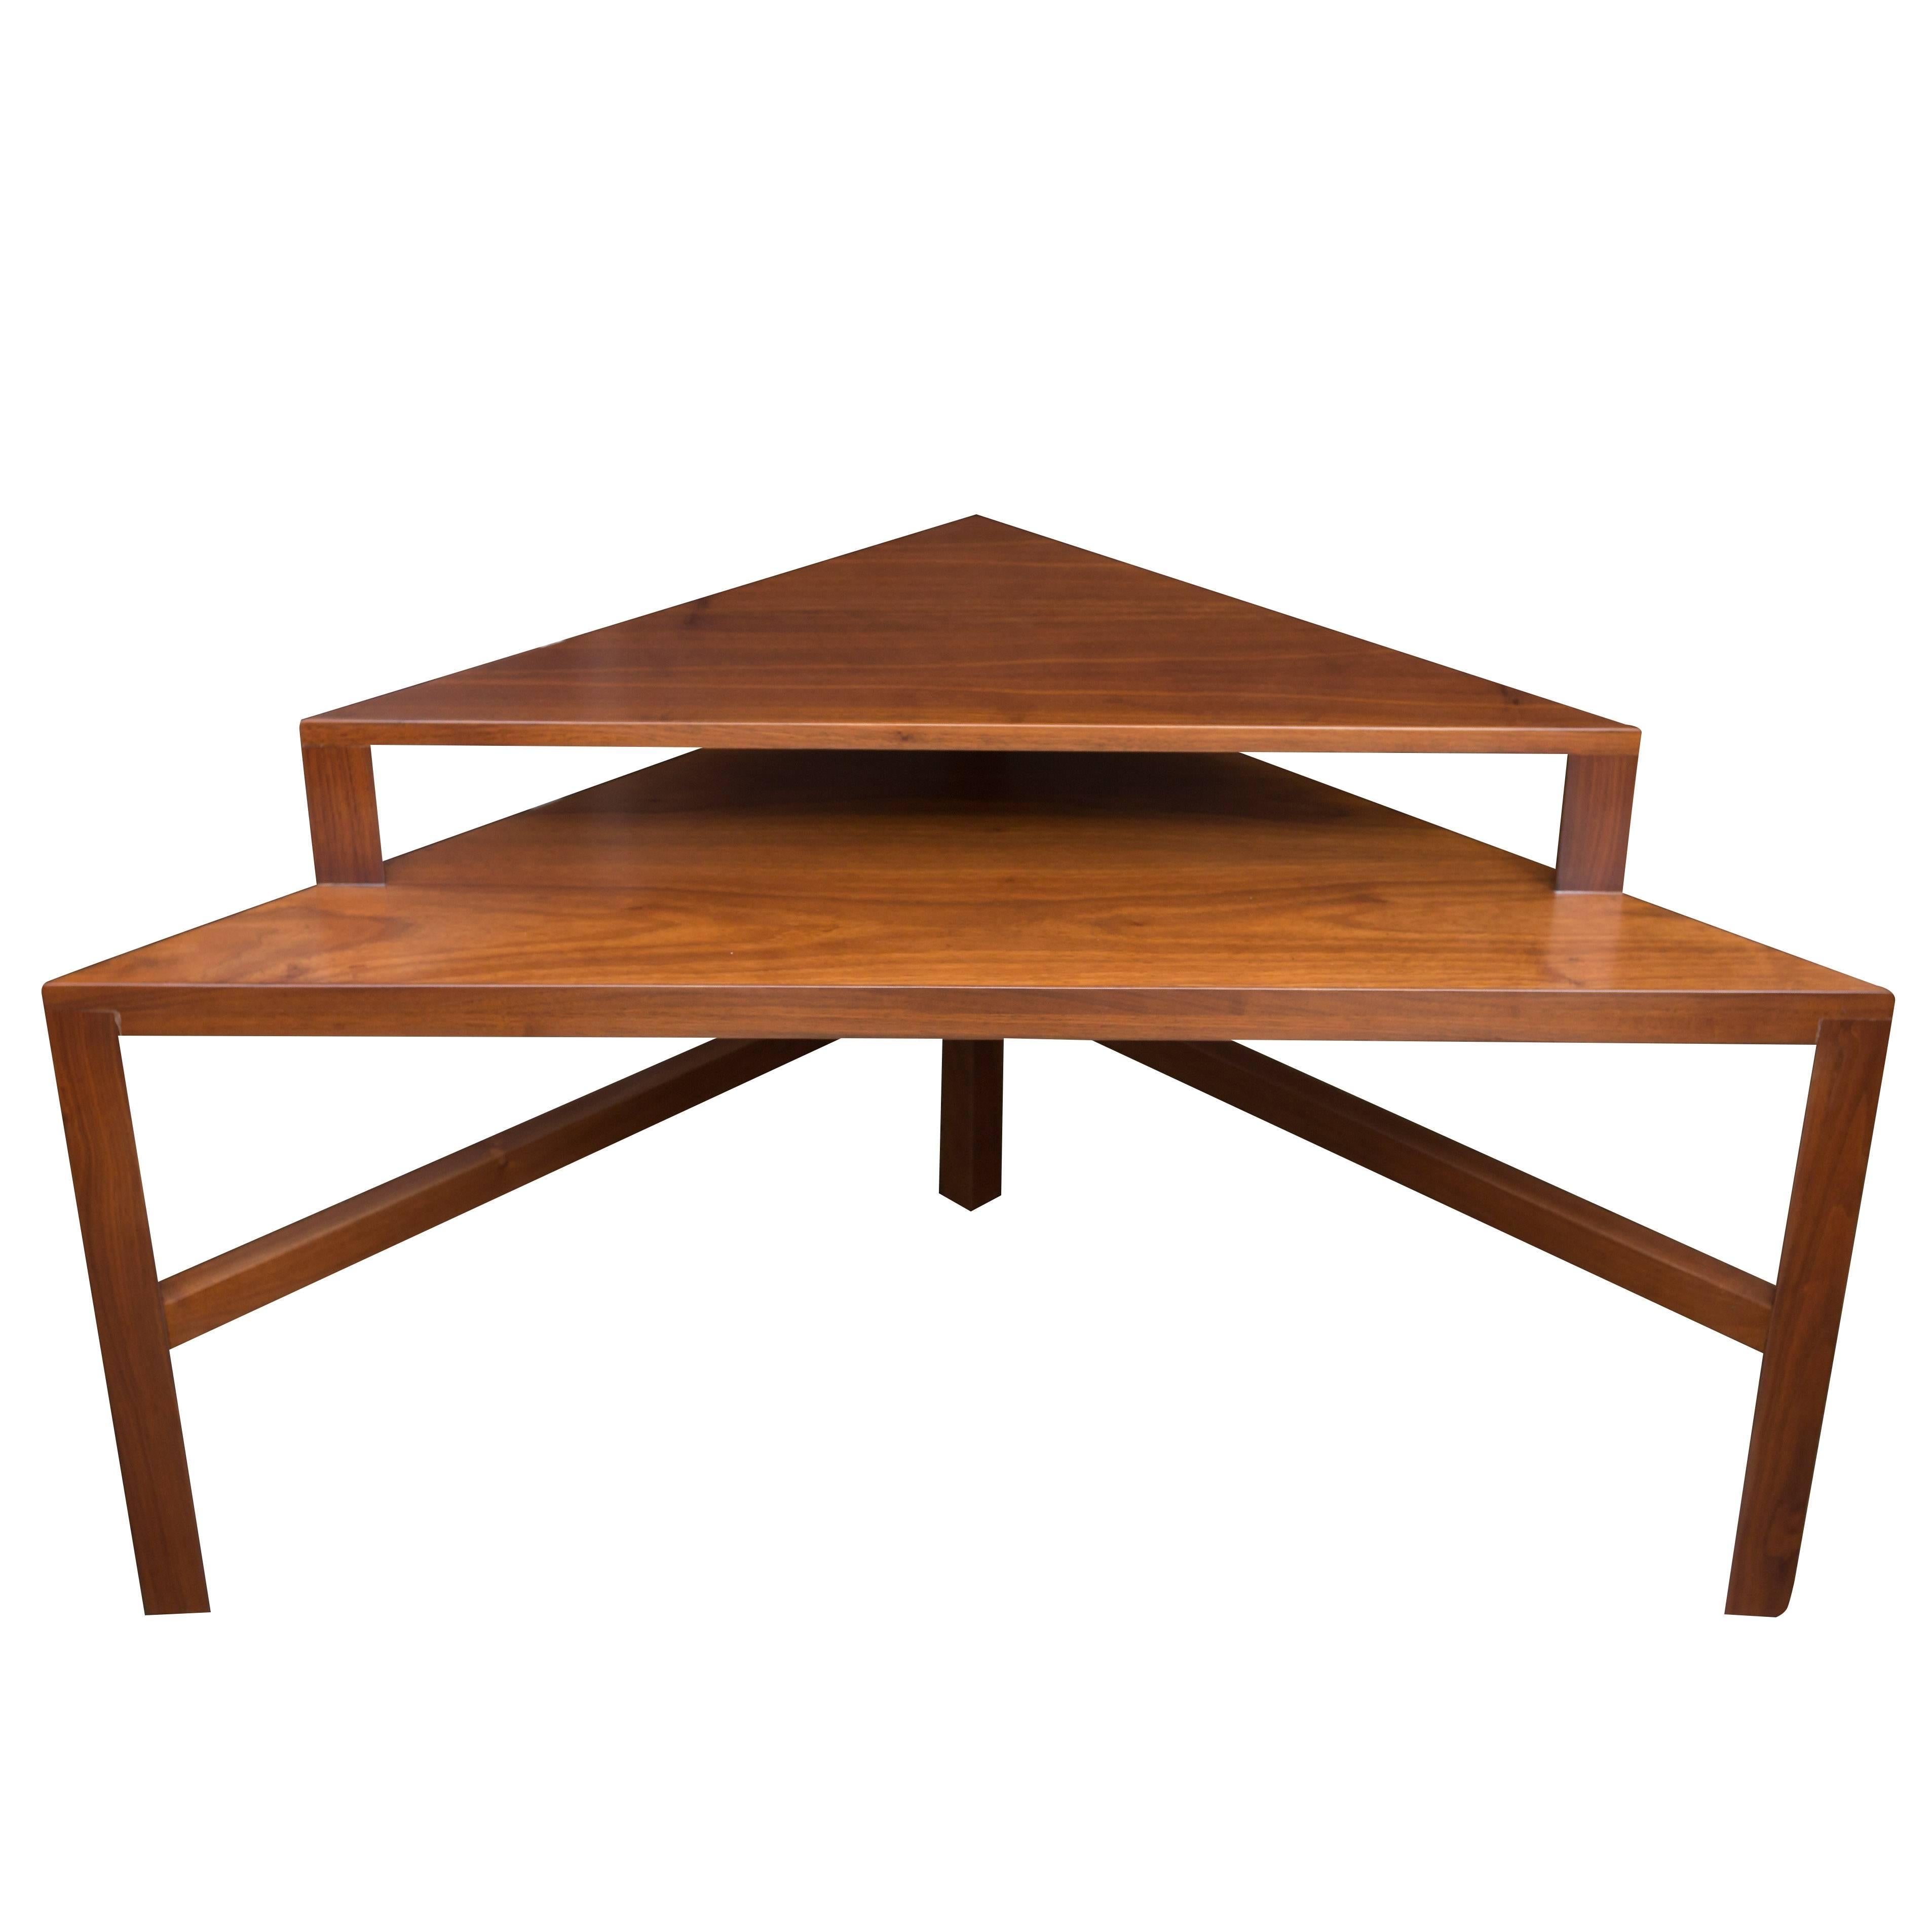 Mid-Century Modern Two-Tiered Triangle End Table